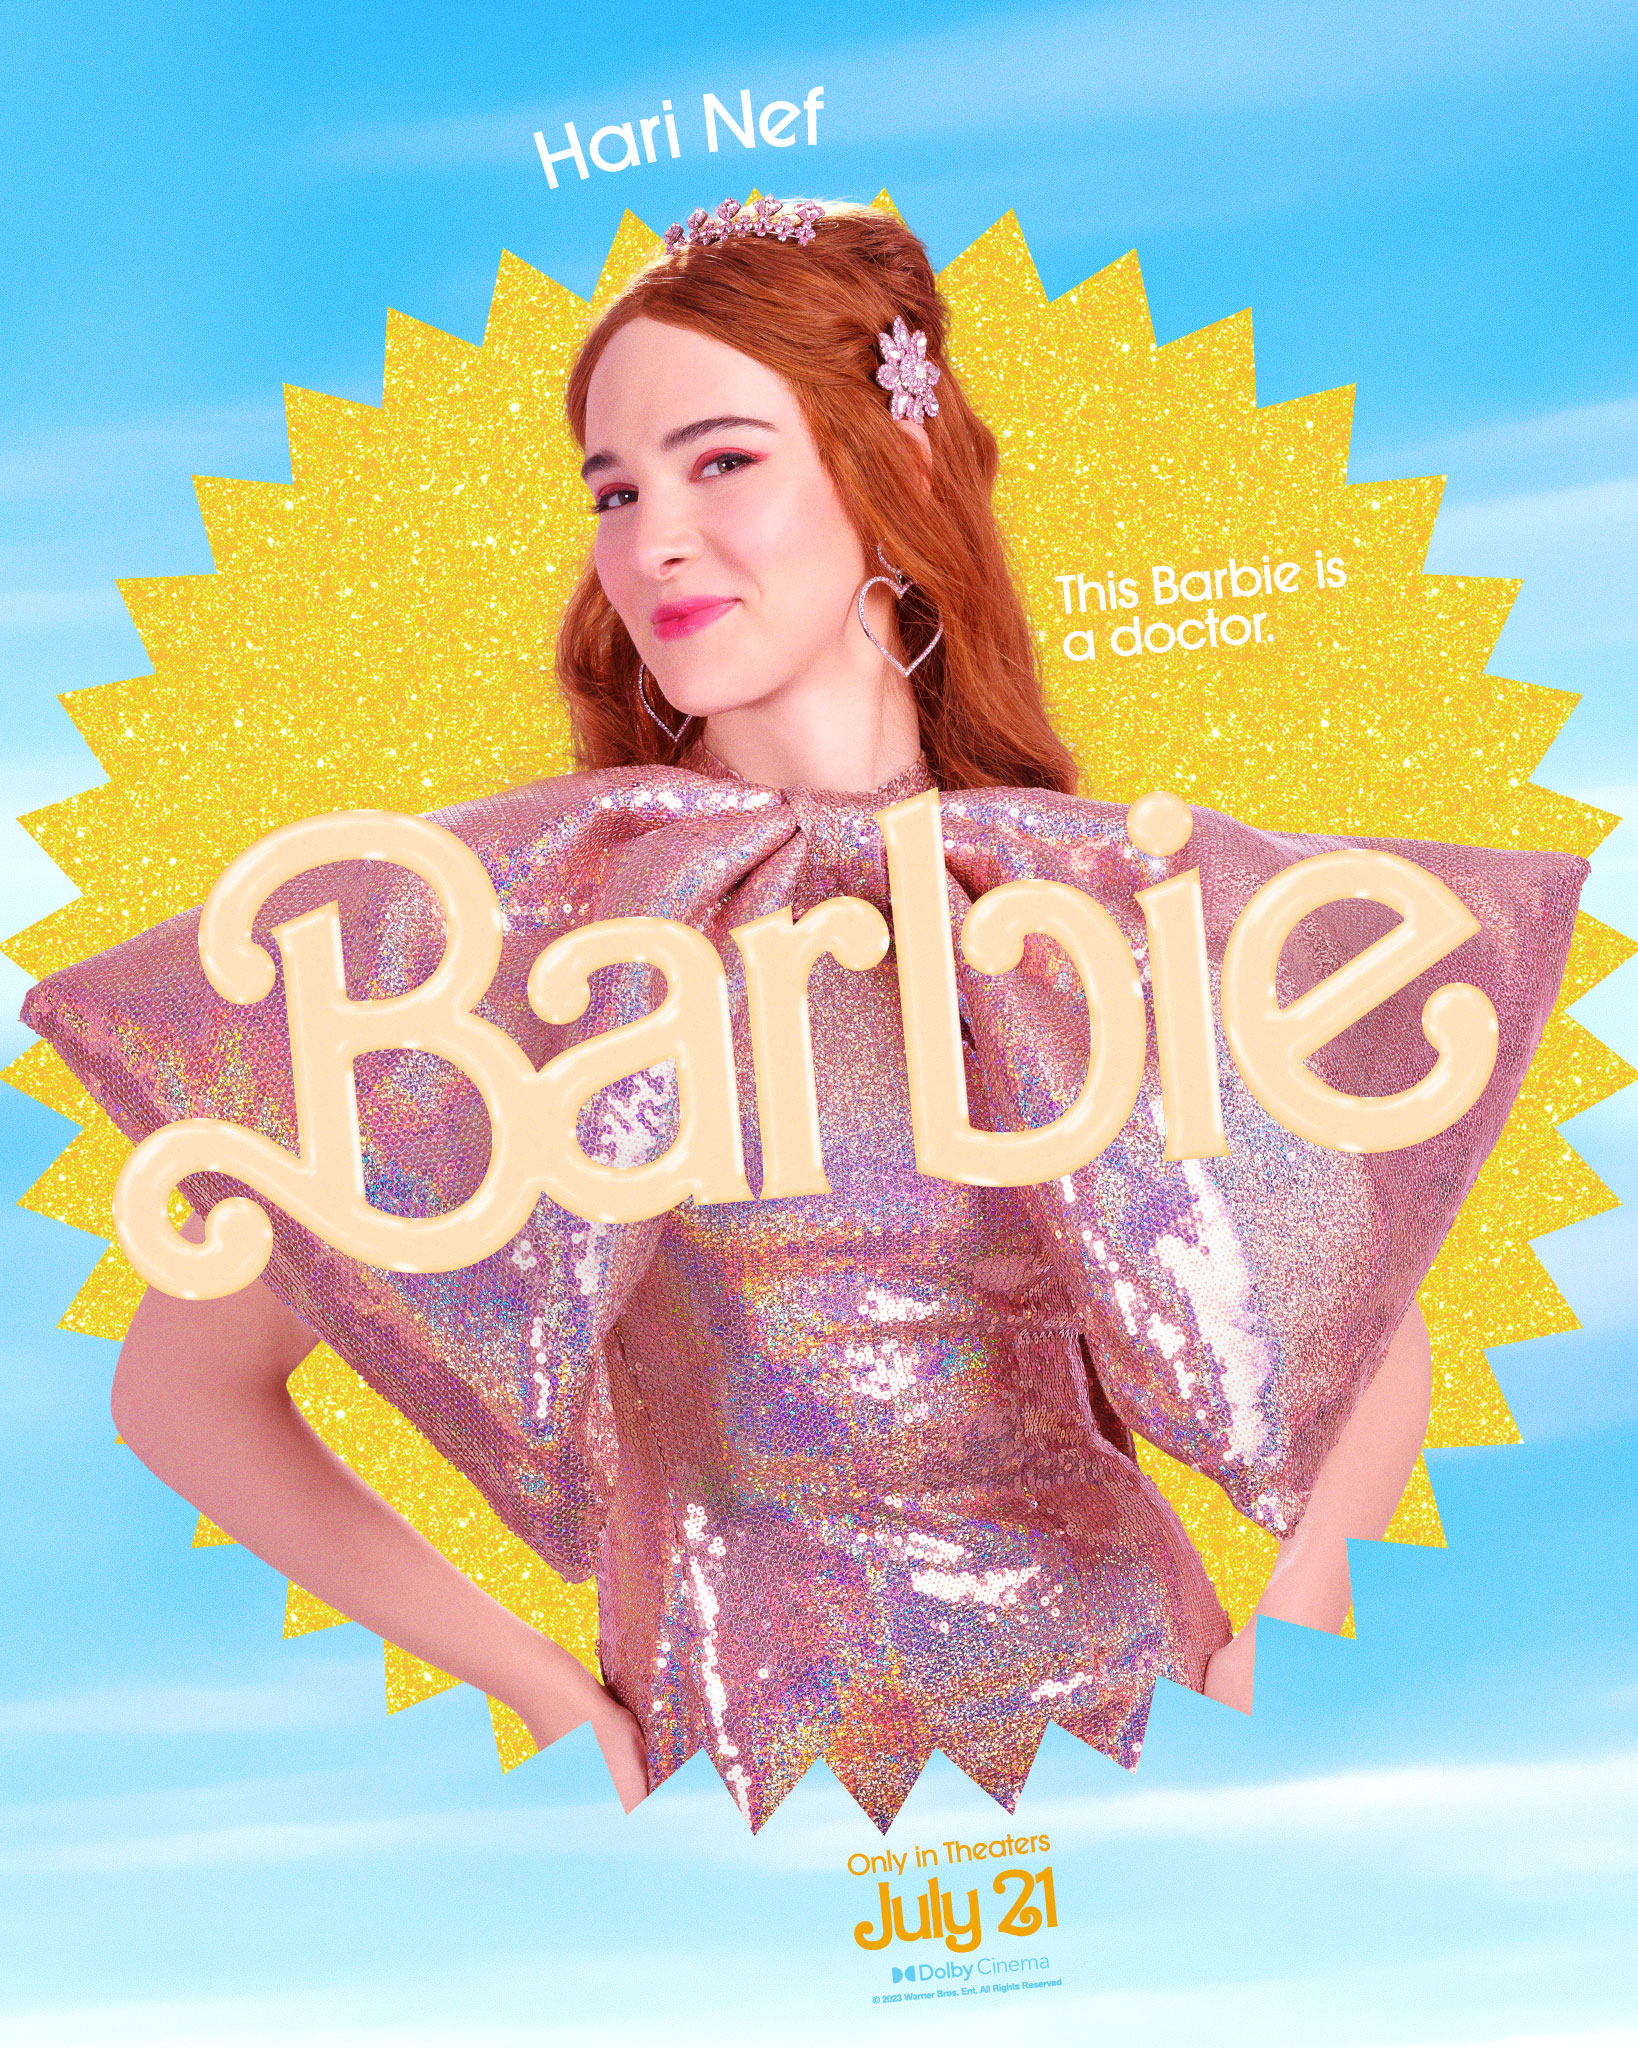 Hari&#x27;s barbie movie poster which says &quot;This Barbie is a doctor&quot;